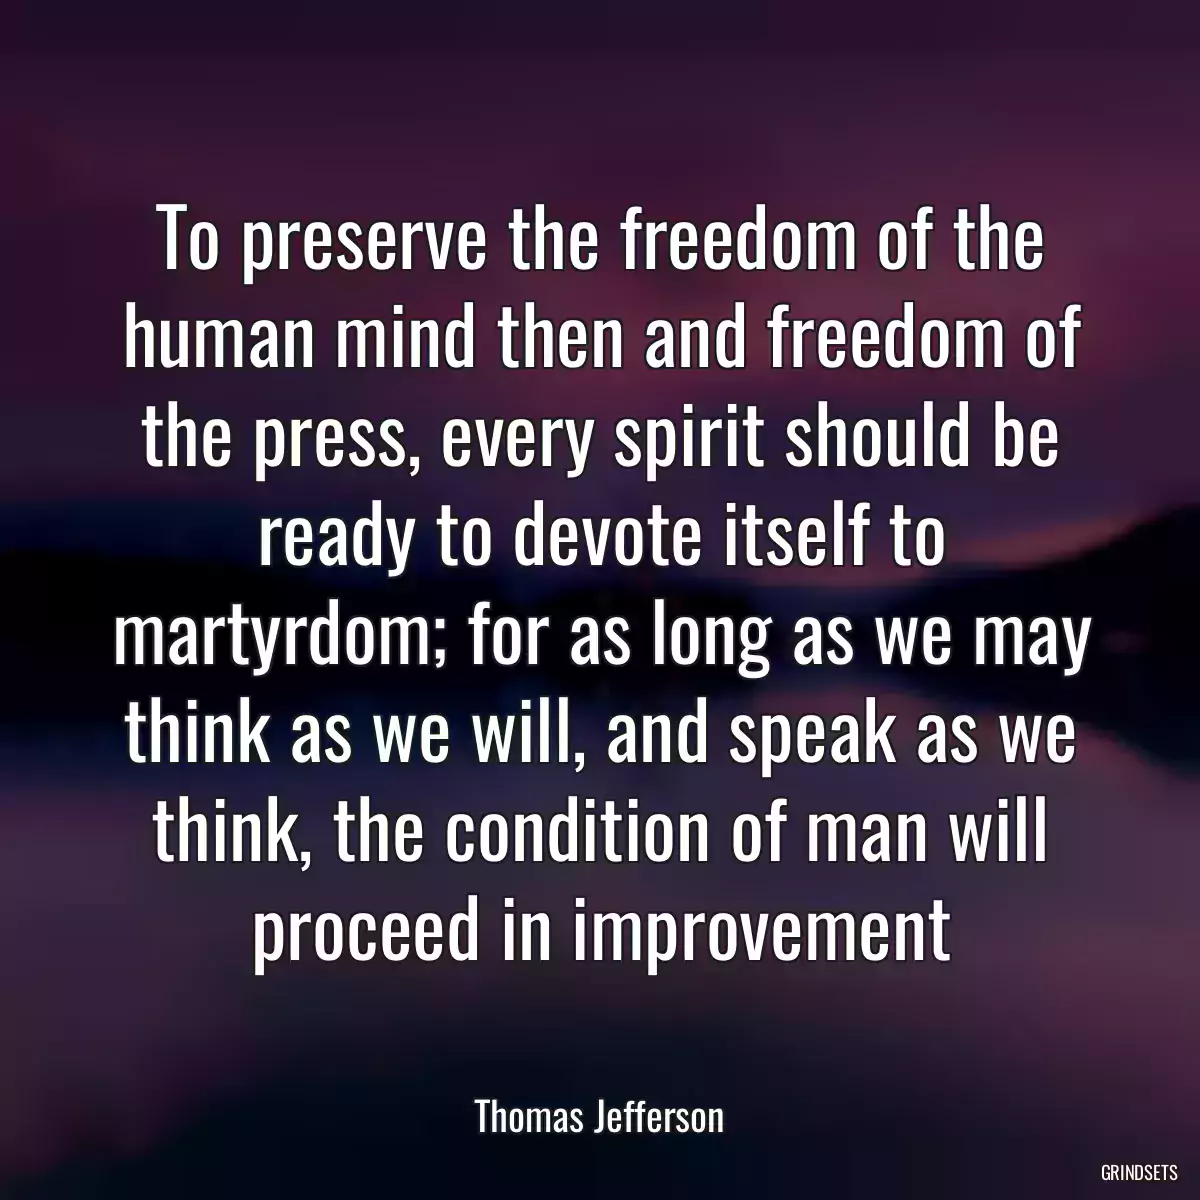 To preserve the freedom of the human mind then and freedom of the press, every spirit should be ready to devote itself to martyrdom; for as long as we may think as we will, and speak as we think, the condition of man will proceed in improvement